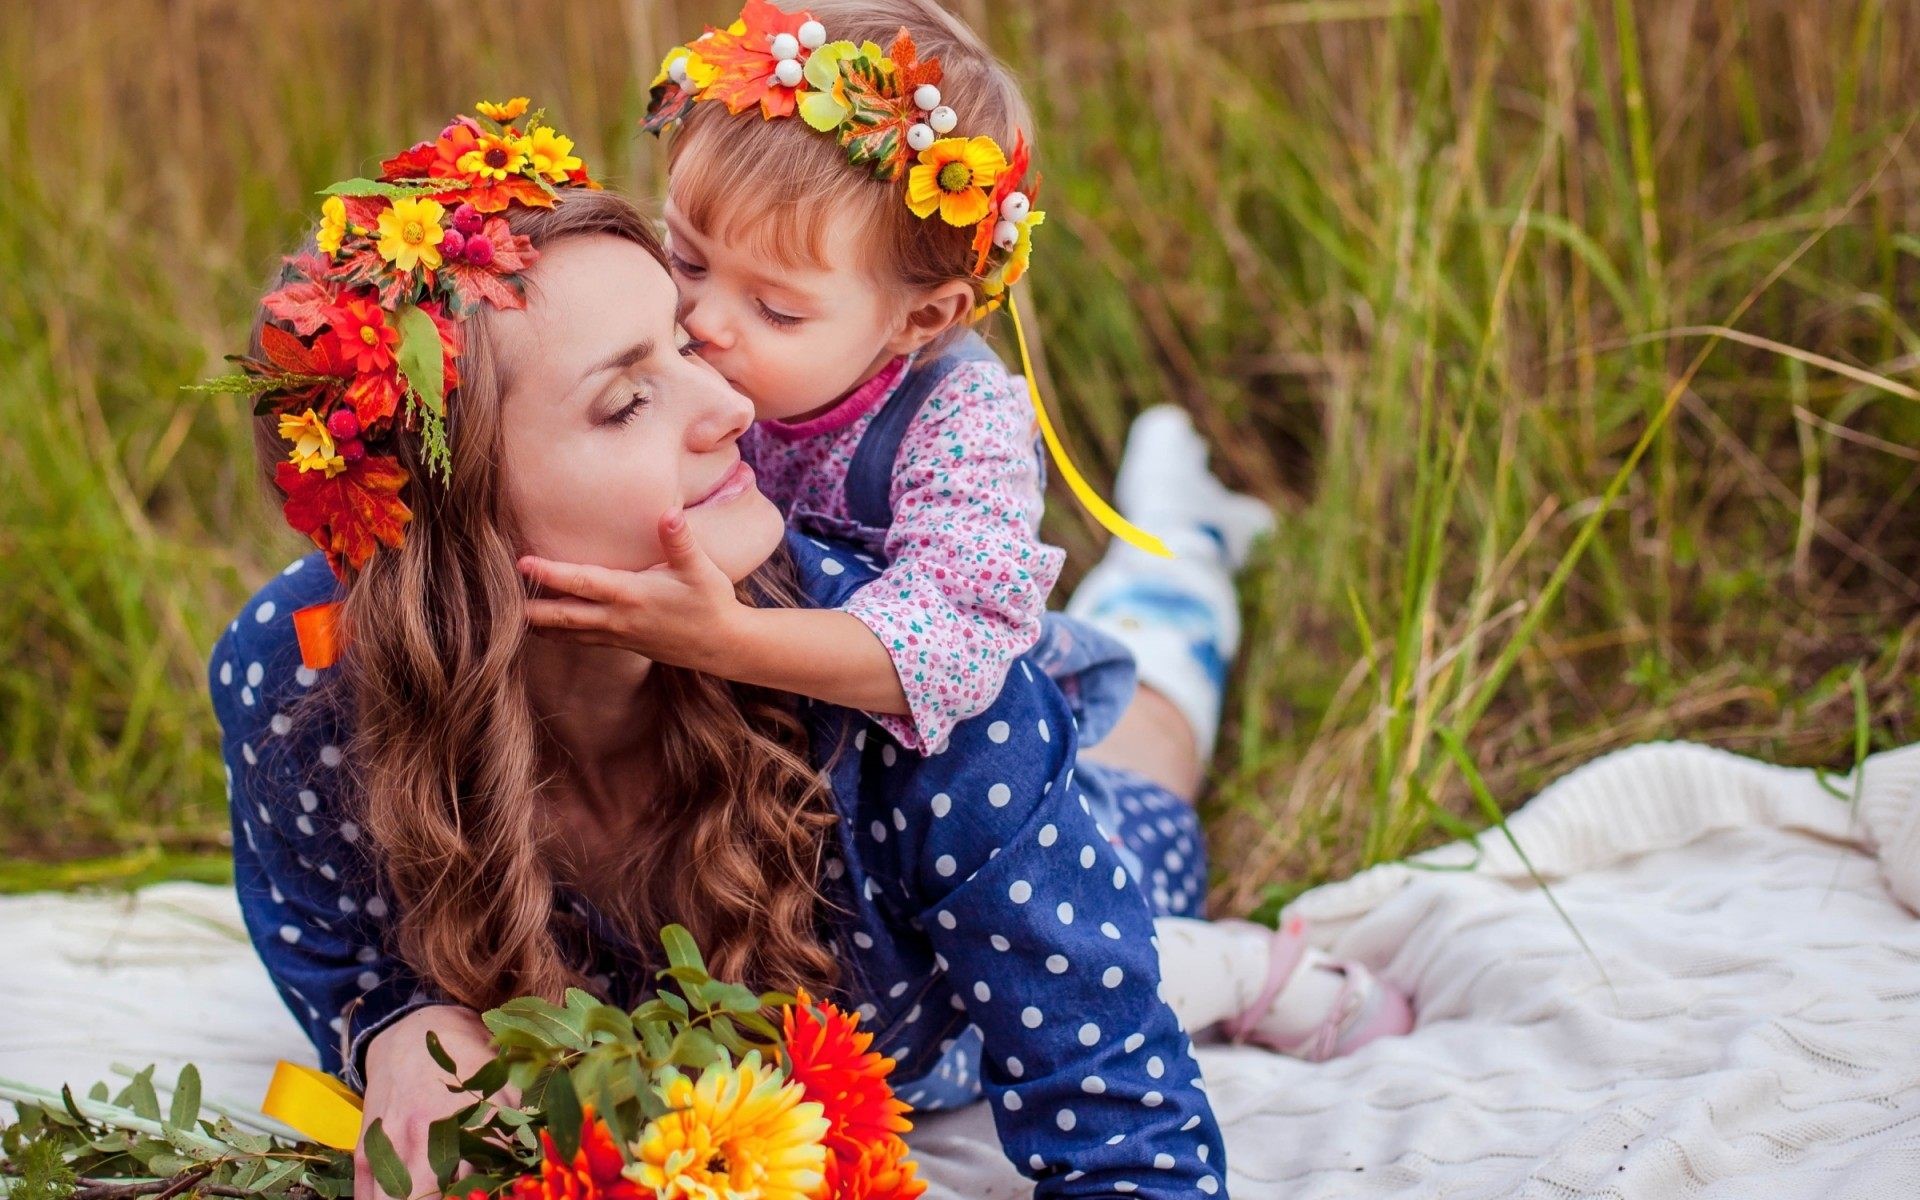 Mother daughter love wallpaper download of cute family